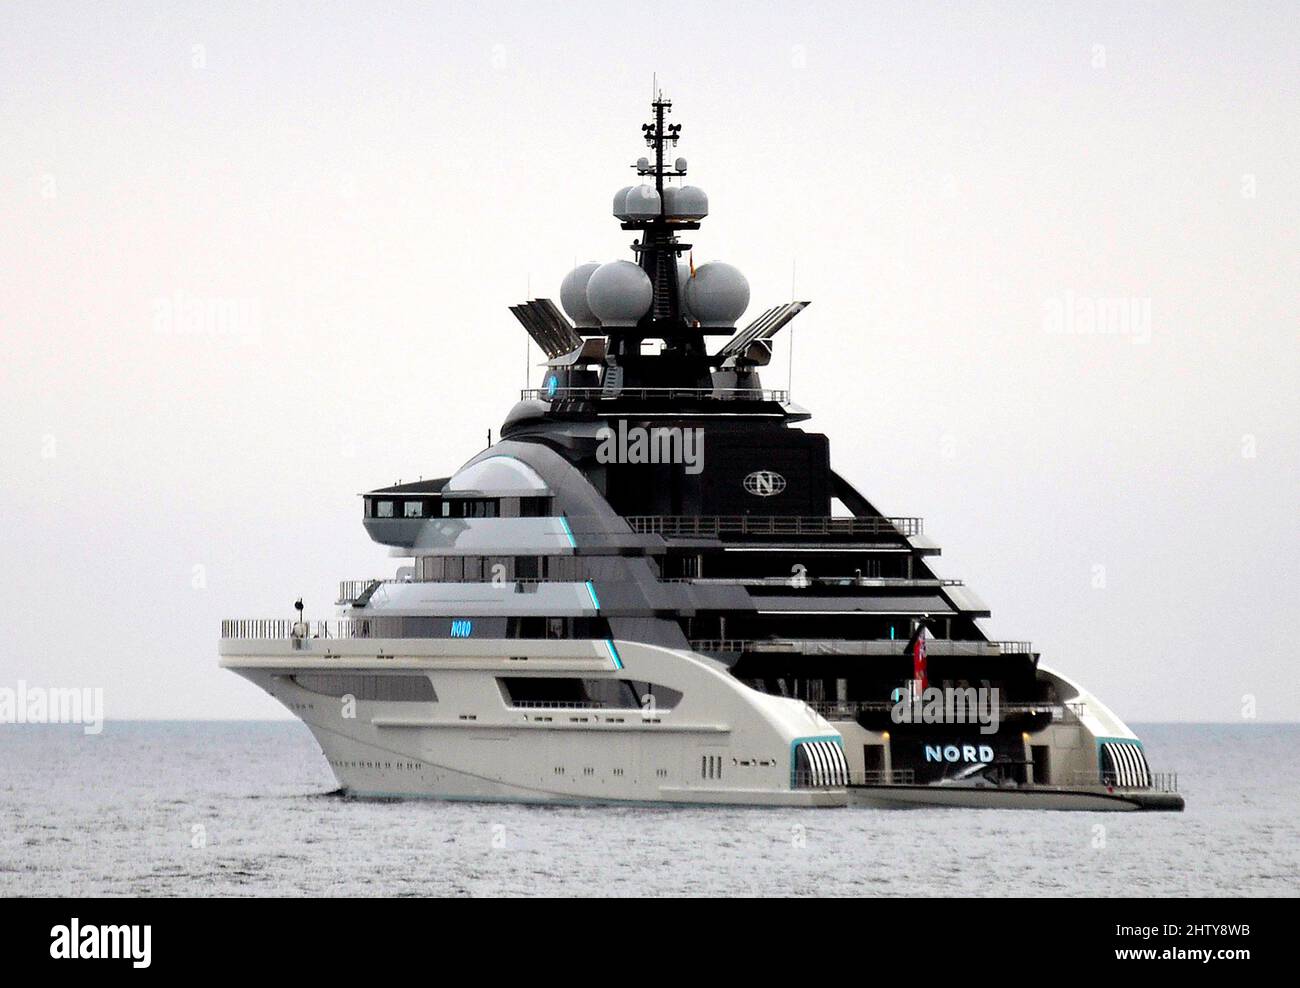 Yacht Nord, 142 meters long, owned by Russian businessman Alexei Mordashov, anchored in the Mediterranean Sea, off the coast of Palma de Mallorca, Spa Stock Photo